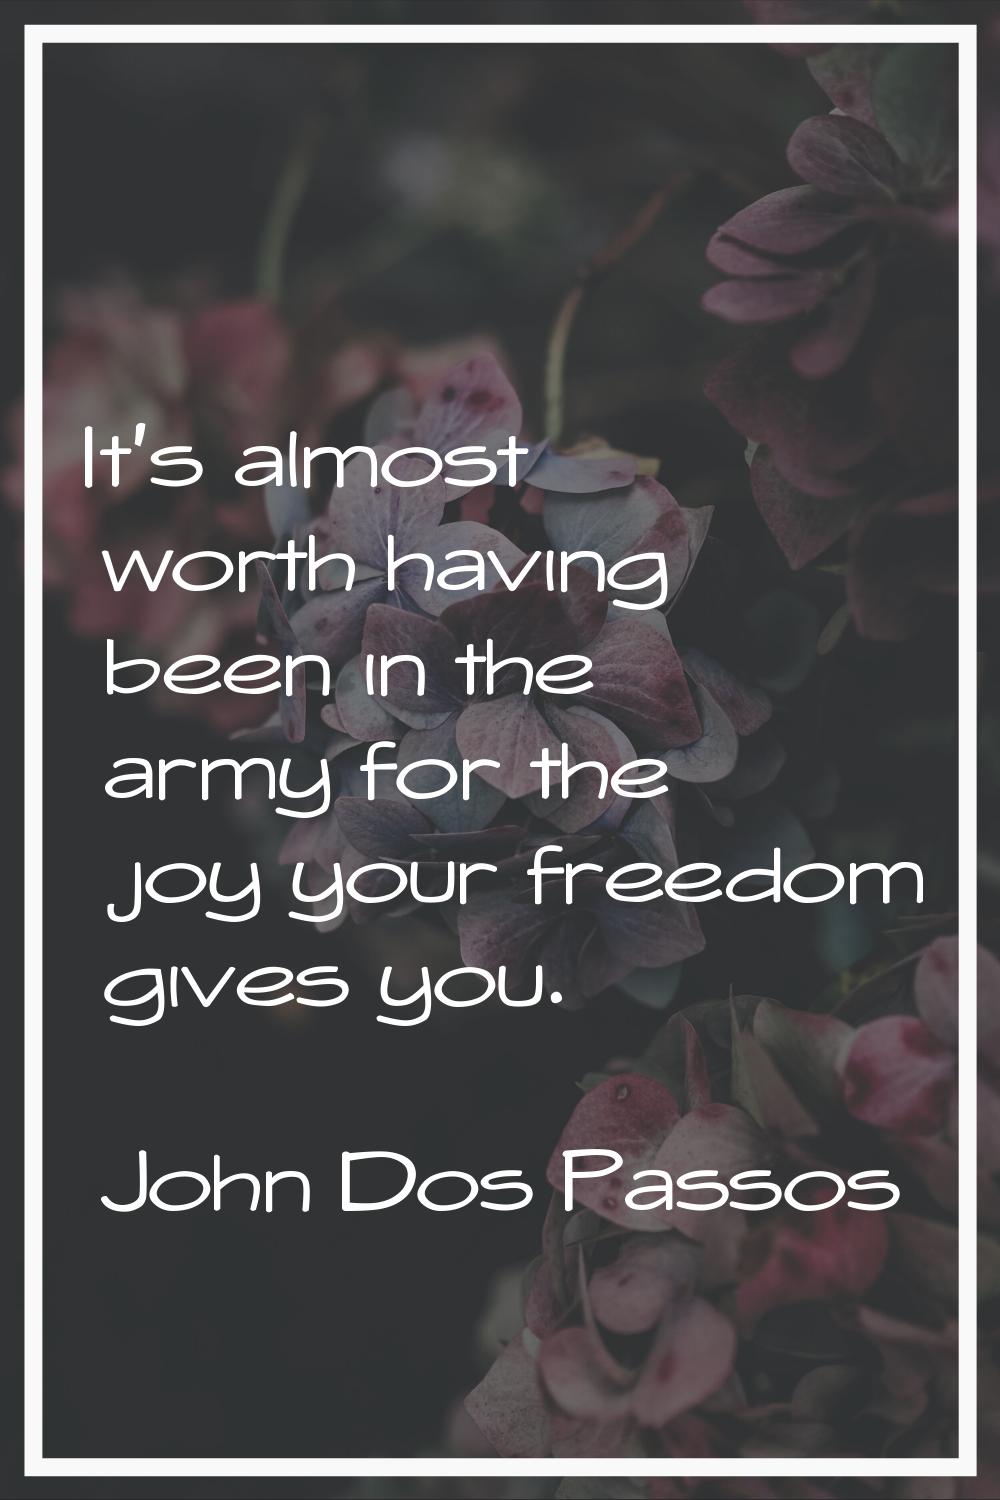 It's almost worth having been in the army for the joy your freedom gives you.